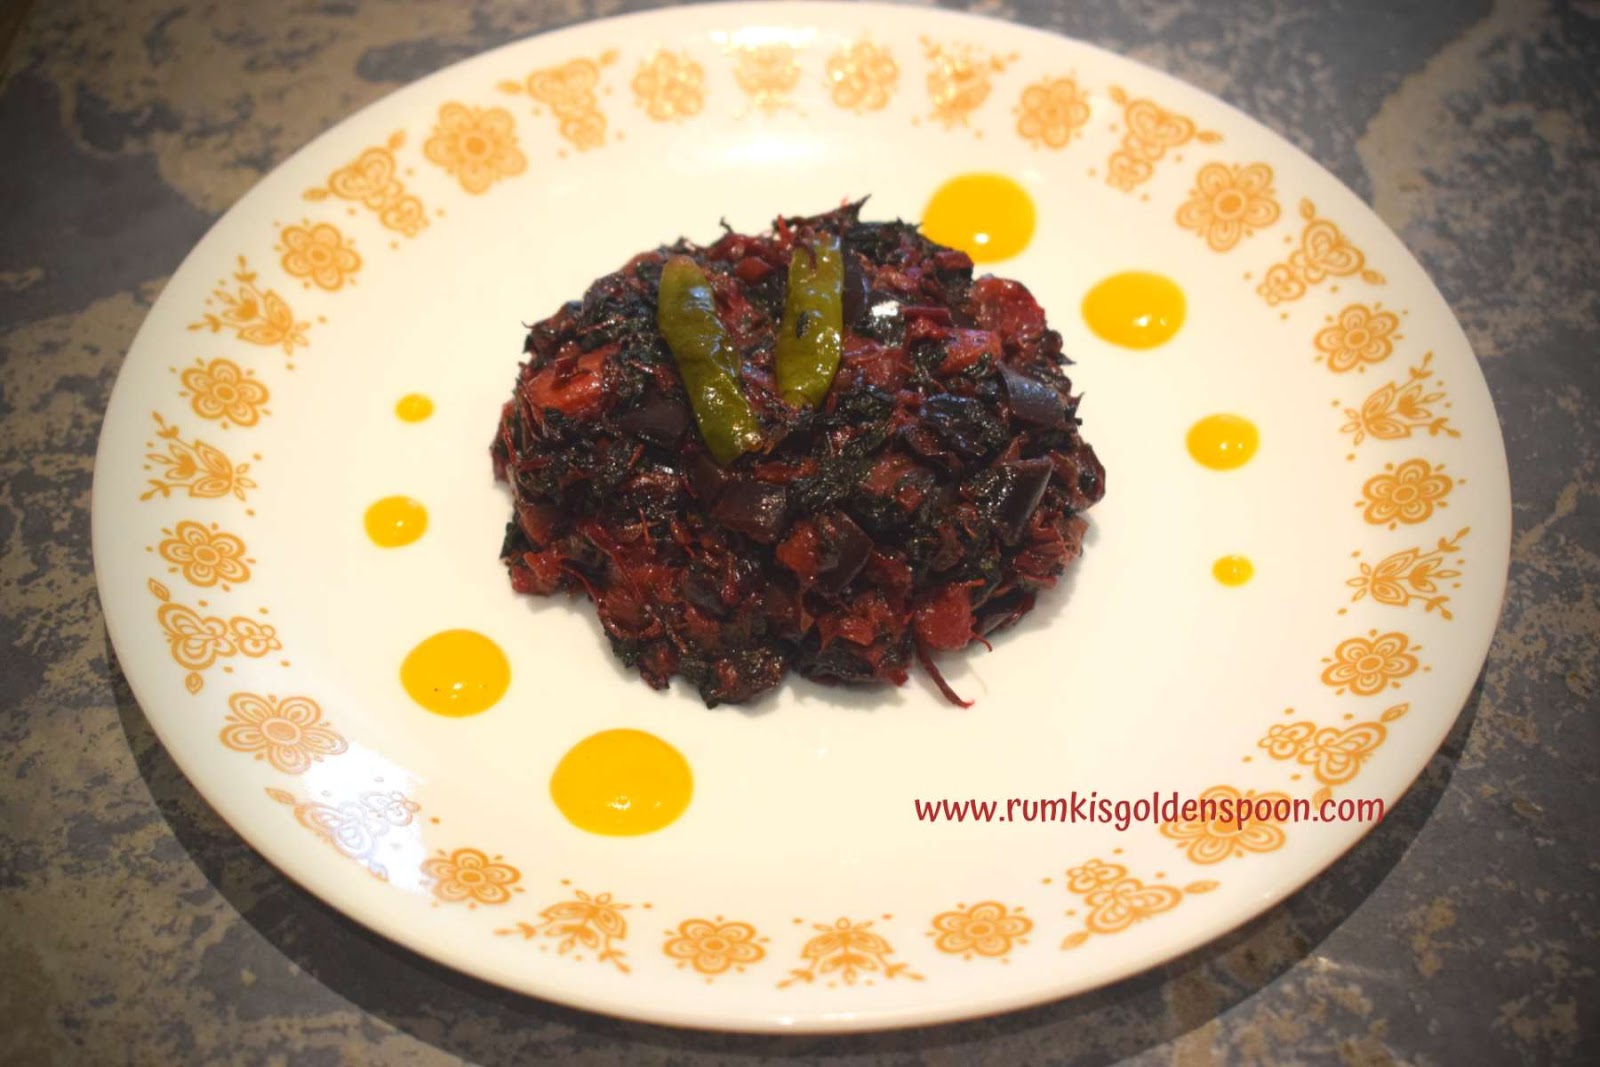 Indian Recipe, Bengali Recipe, Vegan, Vegetarian, Bengali Style Laal Saag (Red Spinach Dry Curry), Laal shaak, amarnath leaves dry curry, laal palak dry curry, Rumki's Golden Spoon